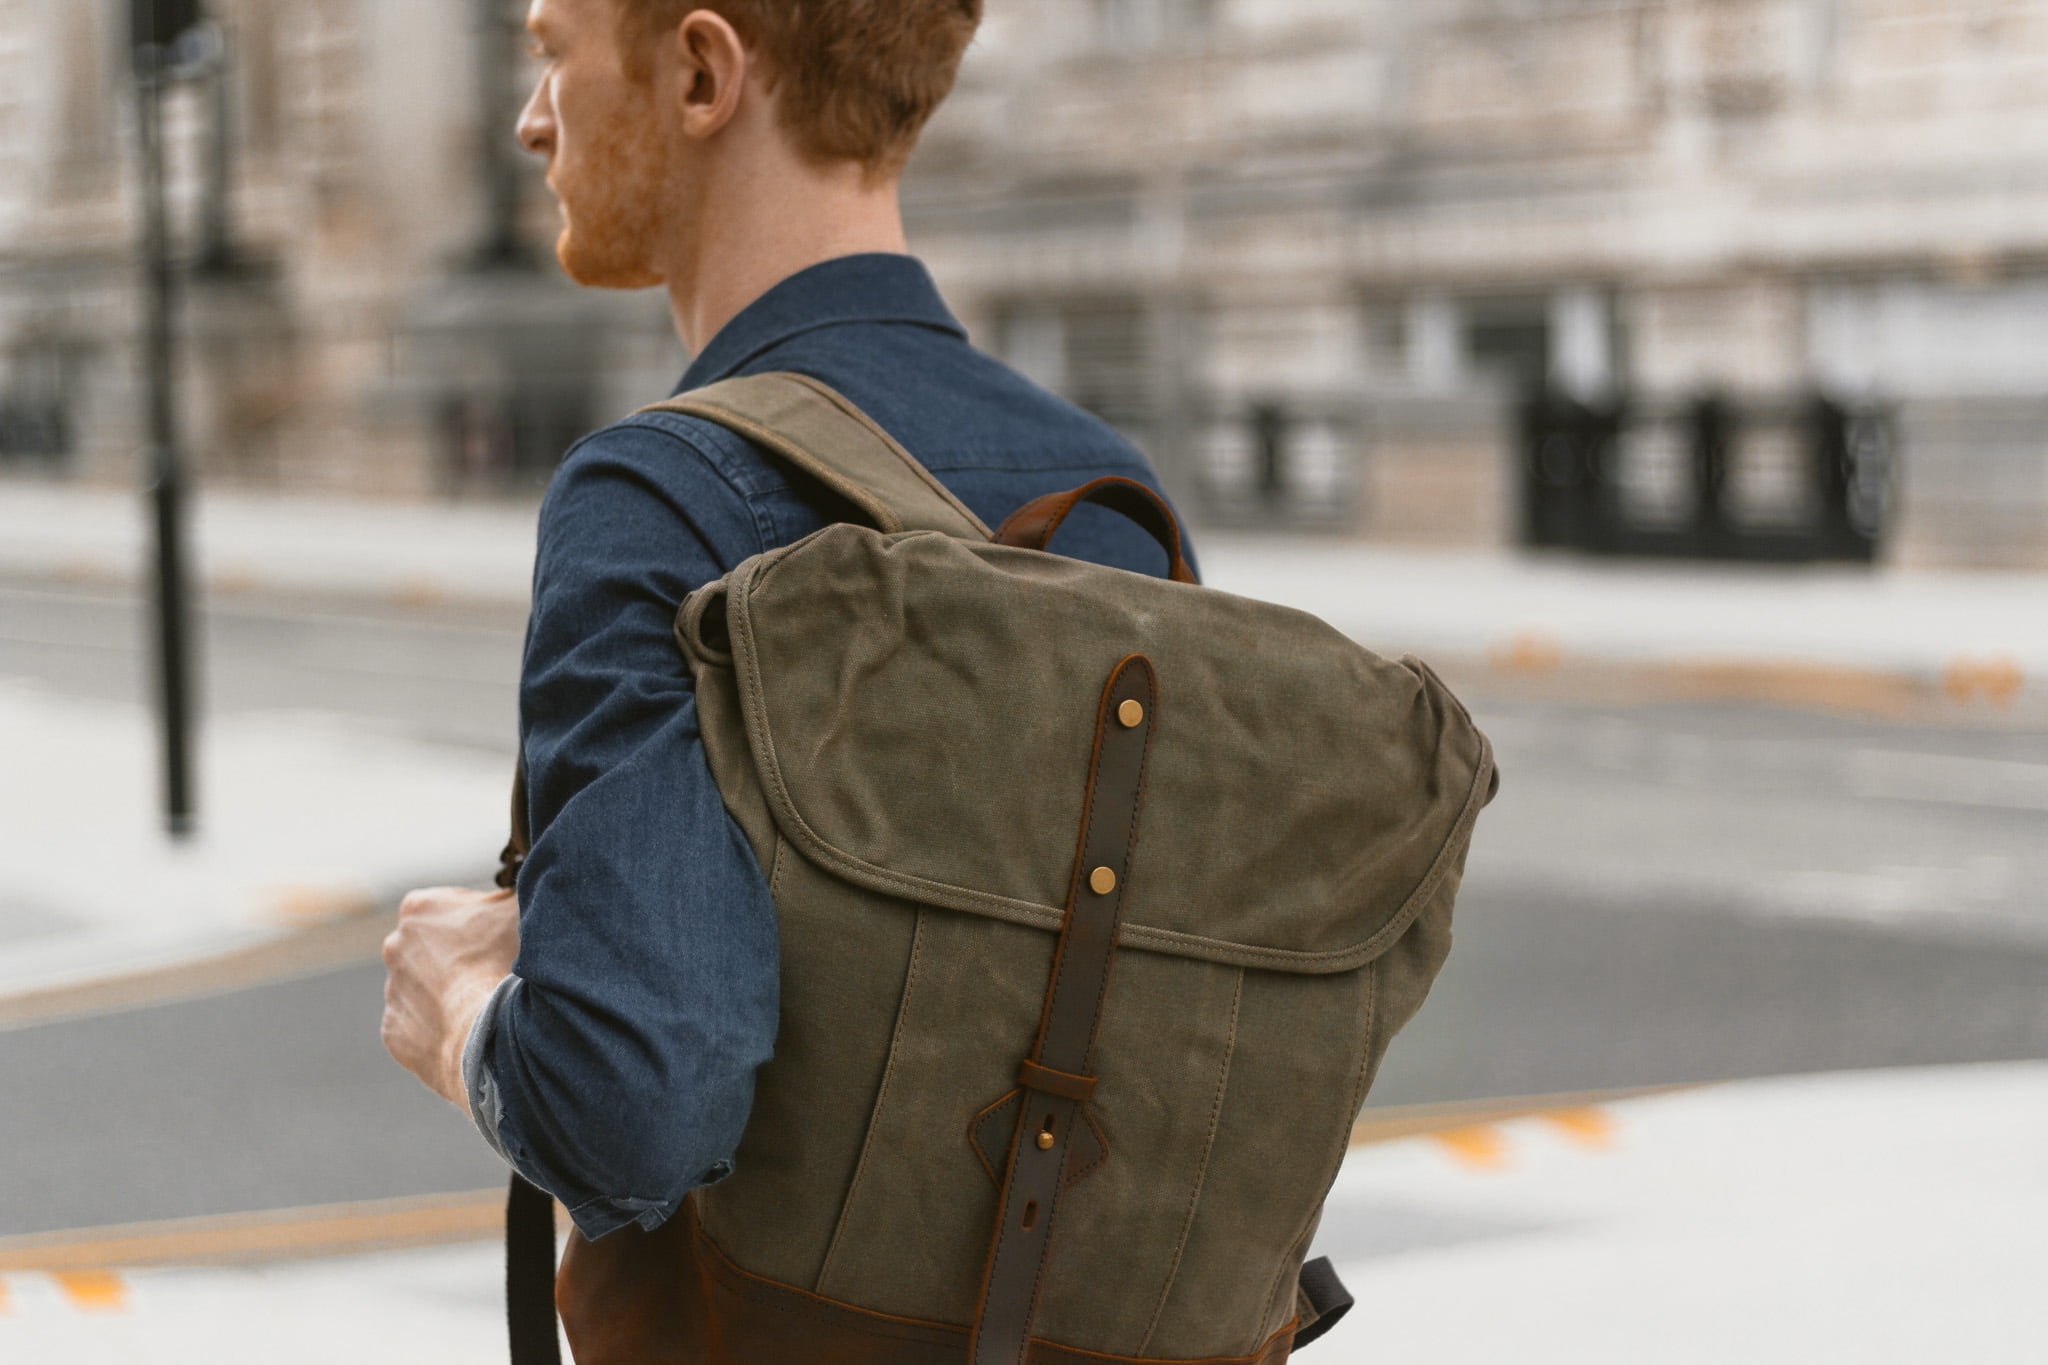 Rugged Vintage-Style Graphite Canvas & Leather Backpack